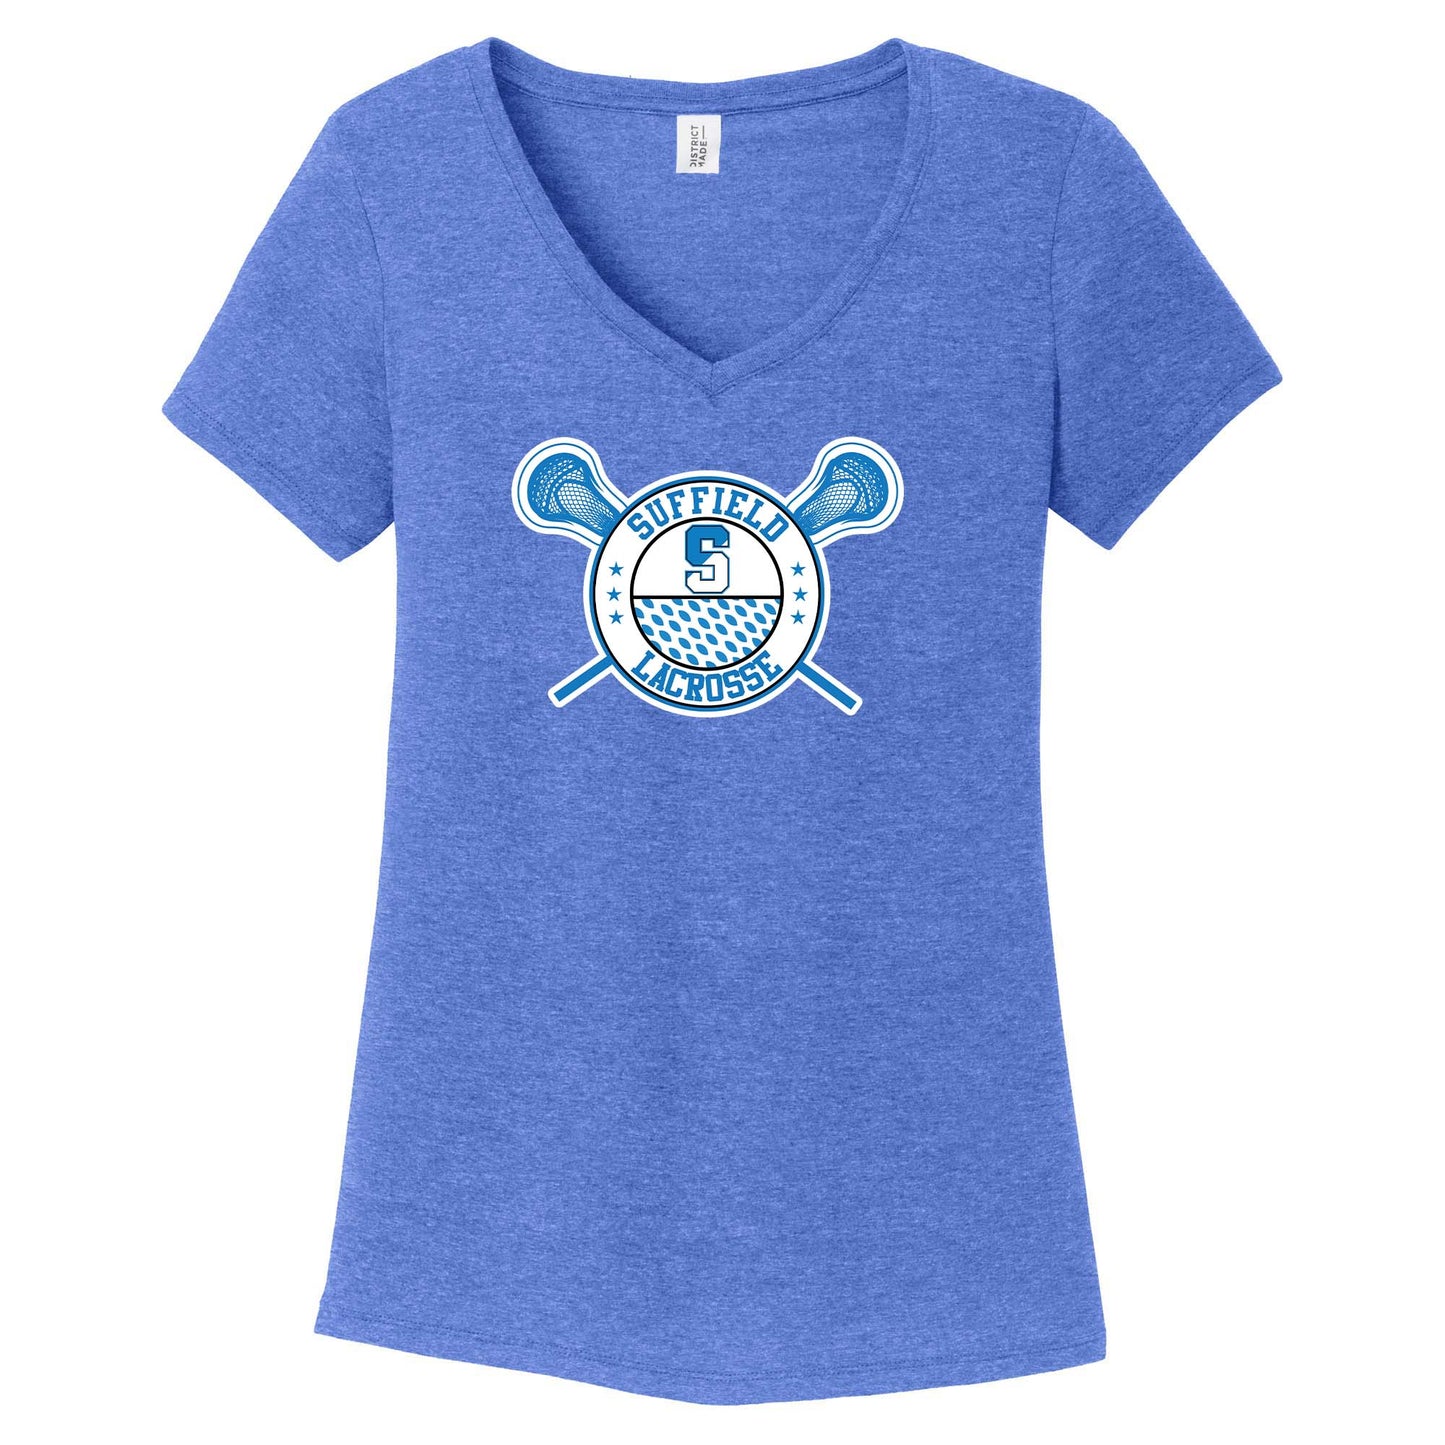 Suffield Youth Lacrosse - Ladies V-Neck Tee "Circle" - DM1350L (color options available)